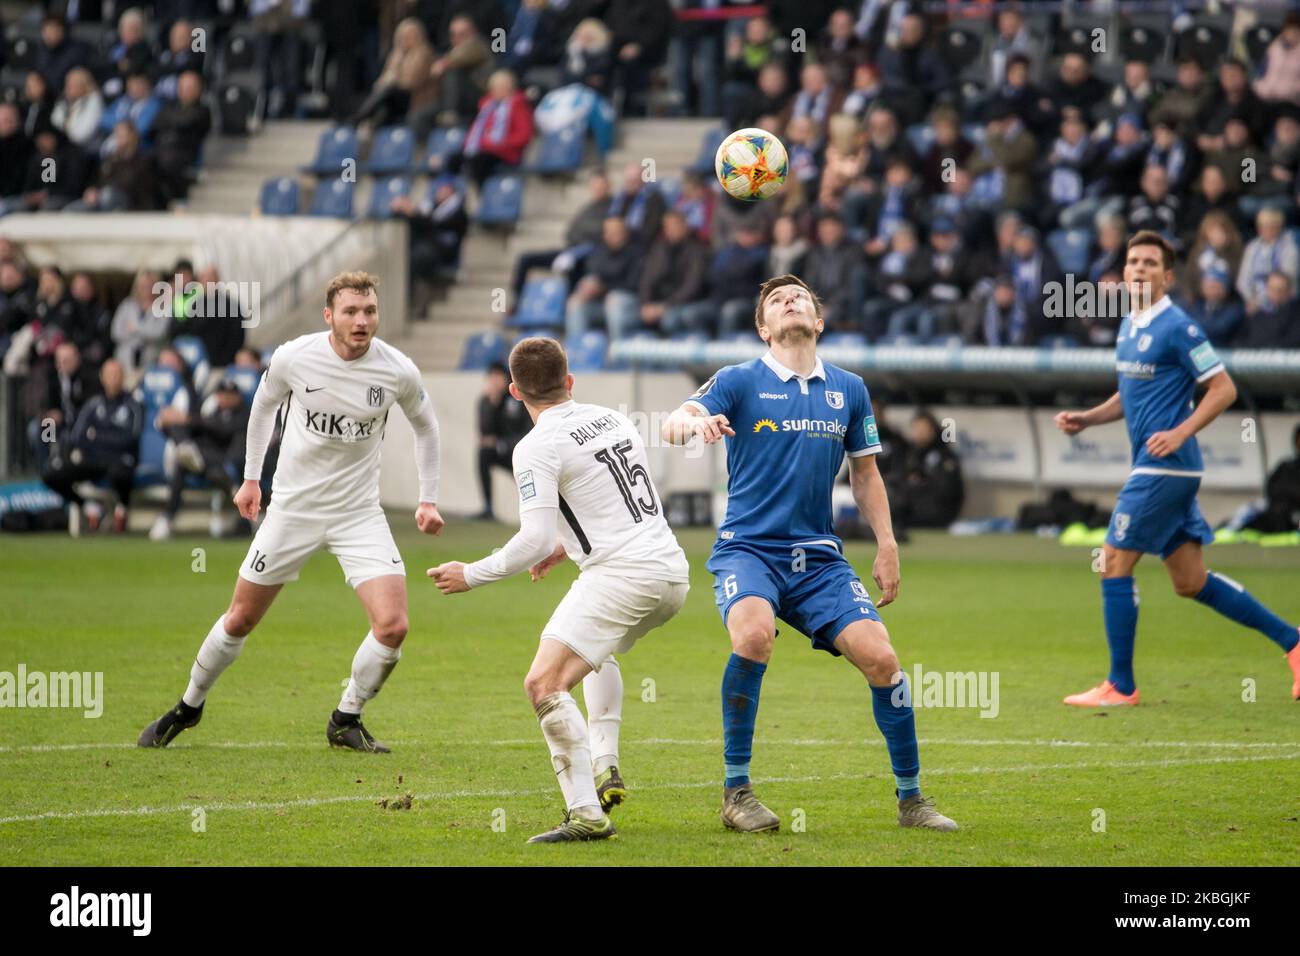 Björn Rother of Magdeburg and Markus Ballmert of SV Meppen during the 3. Bundesliga match between 1. FC Magdeburg and SV Meppen at the MDCC-Arena on February 08, 2020 in Magdeburg, Germany. (Photo by Peter Niedung/NurPhoto) Stock Photo